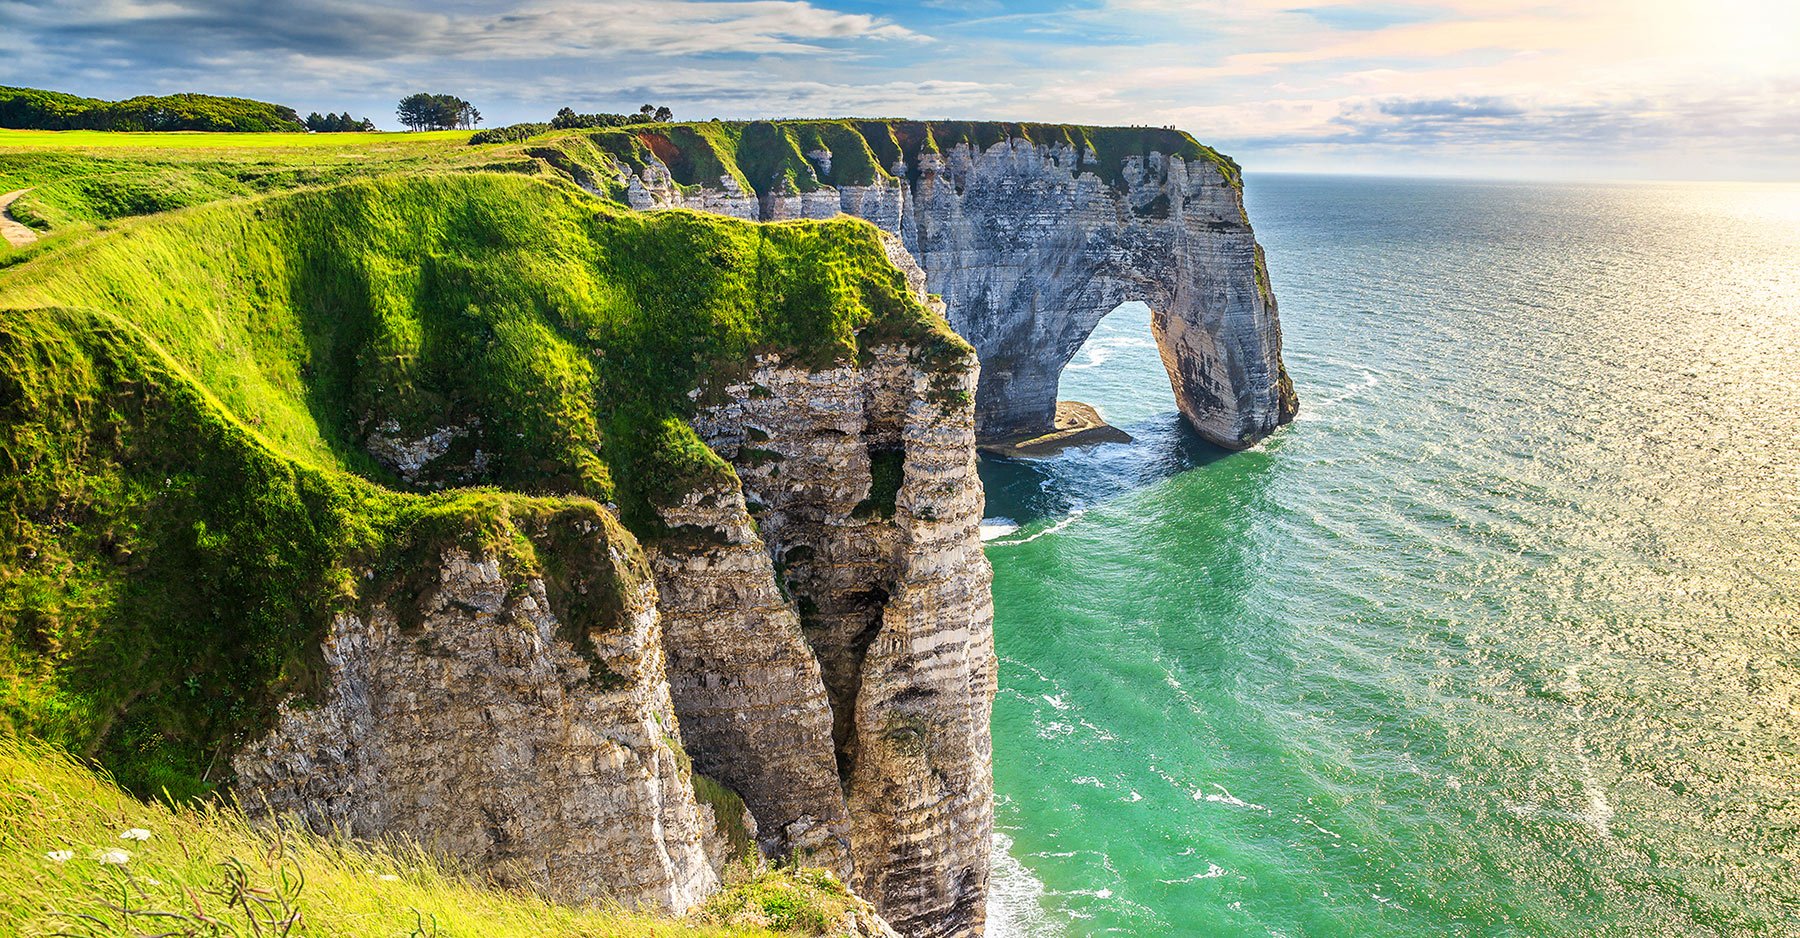 Tailored itineraries in Normandy - Peplum DMC France